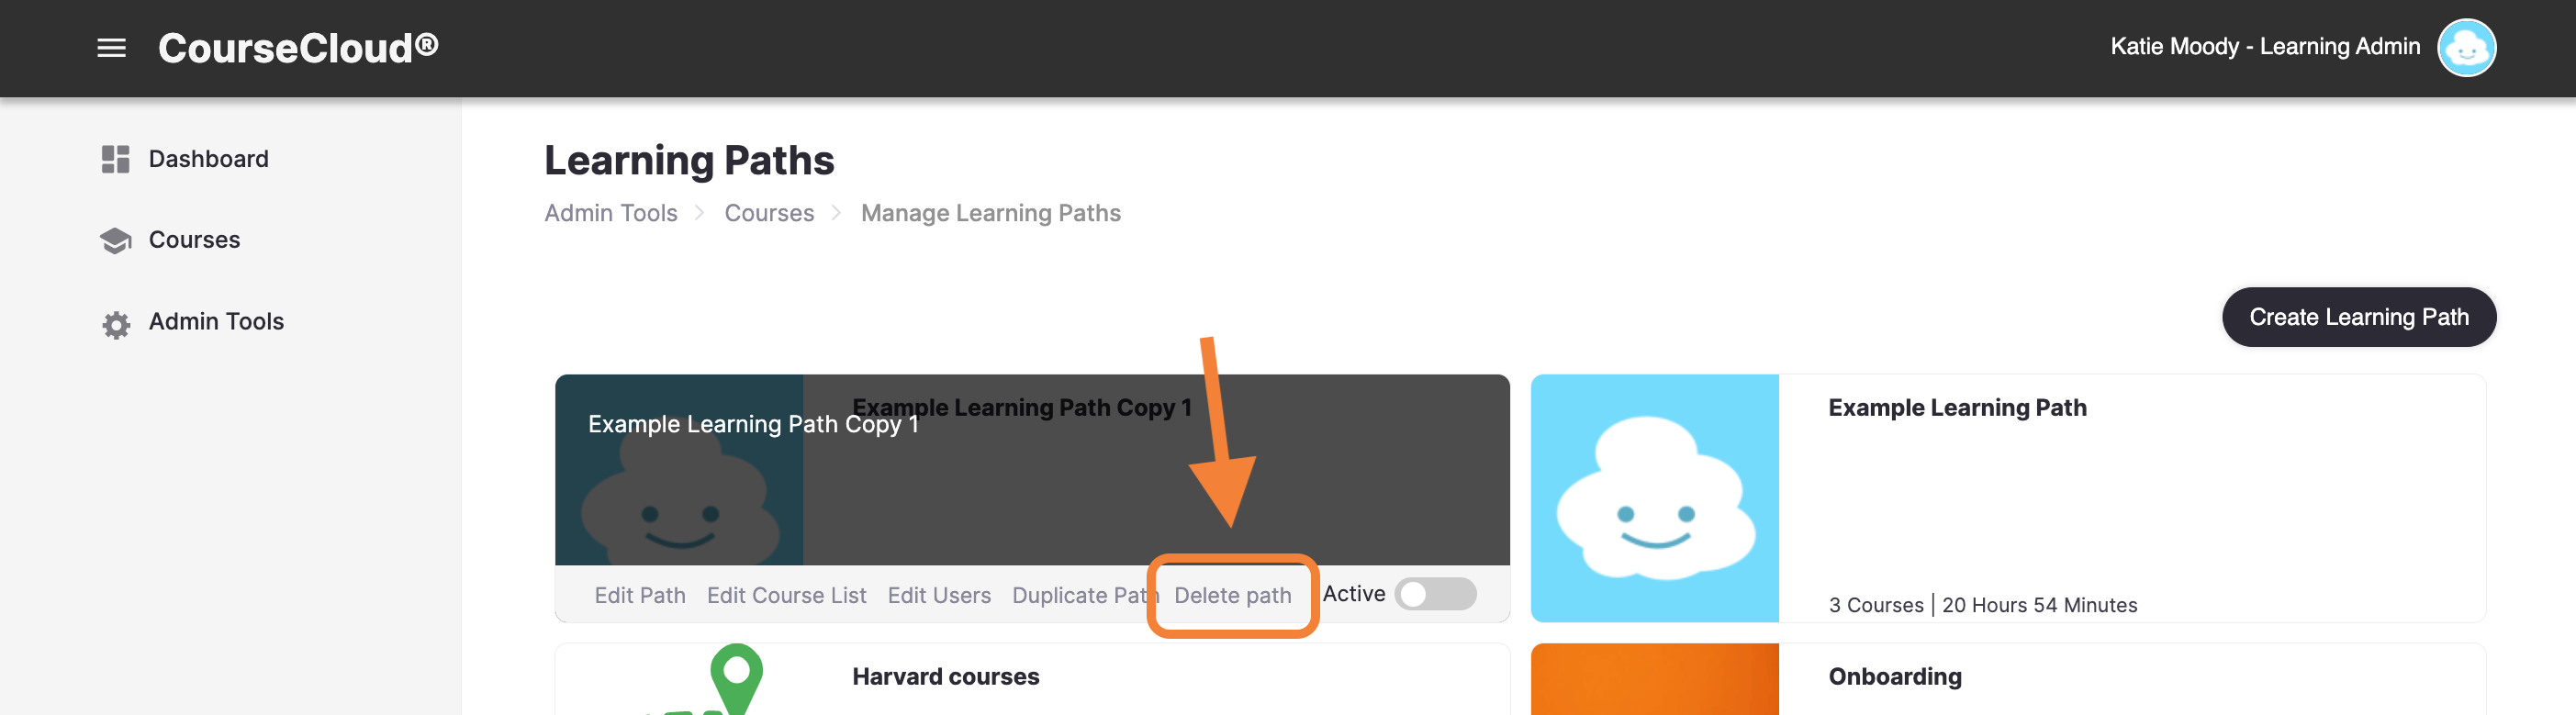 24_-_The_Learning_Paths_page__indicating_an_example_path_s_Delete_Path_tool.png